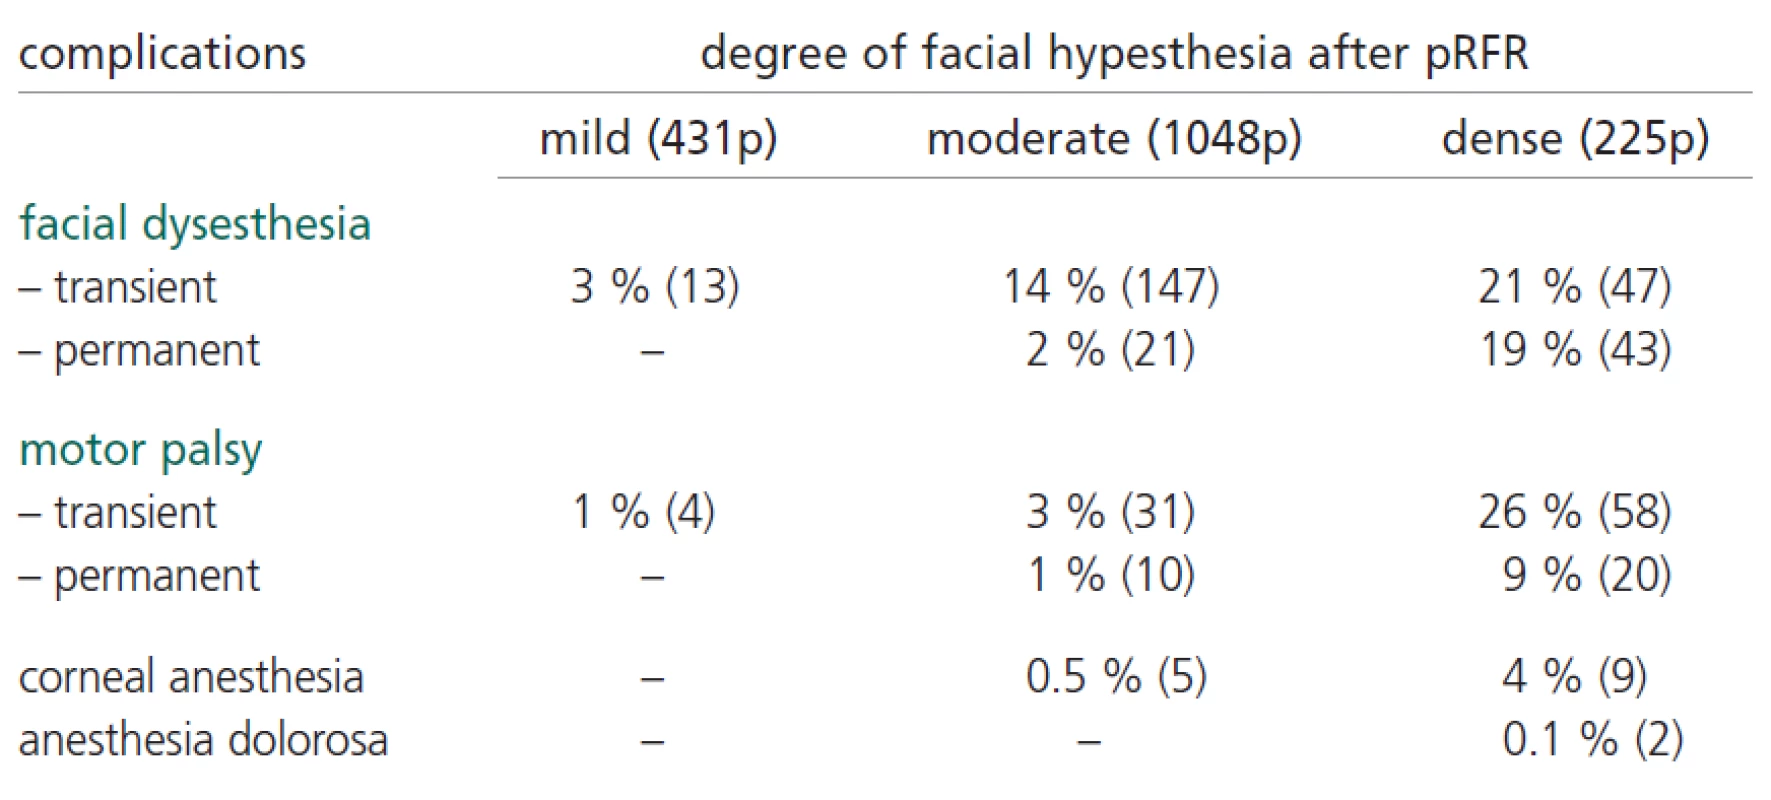 Complications after pRFR in colleration of degree of facial hypethesia (1704 p).